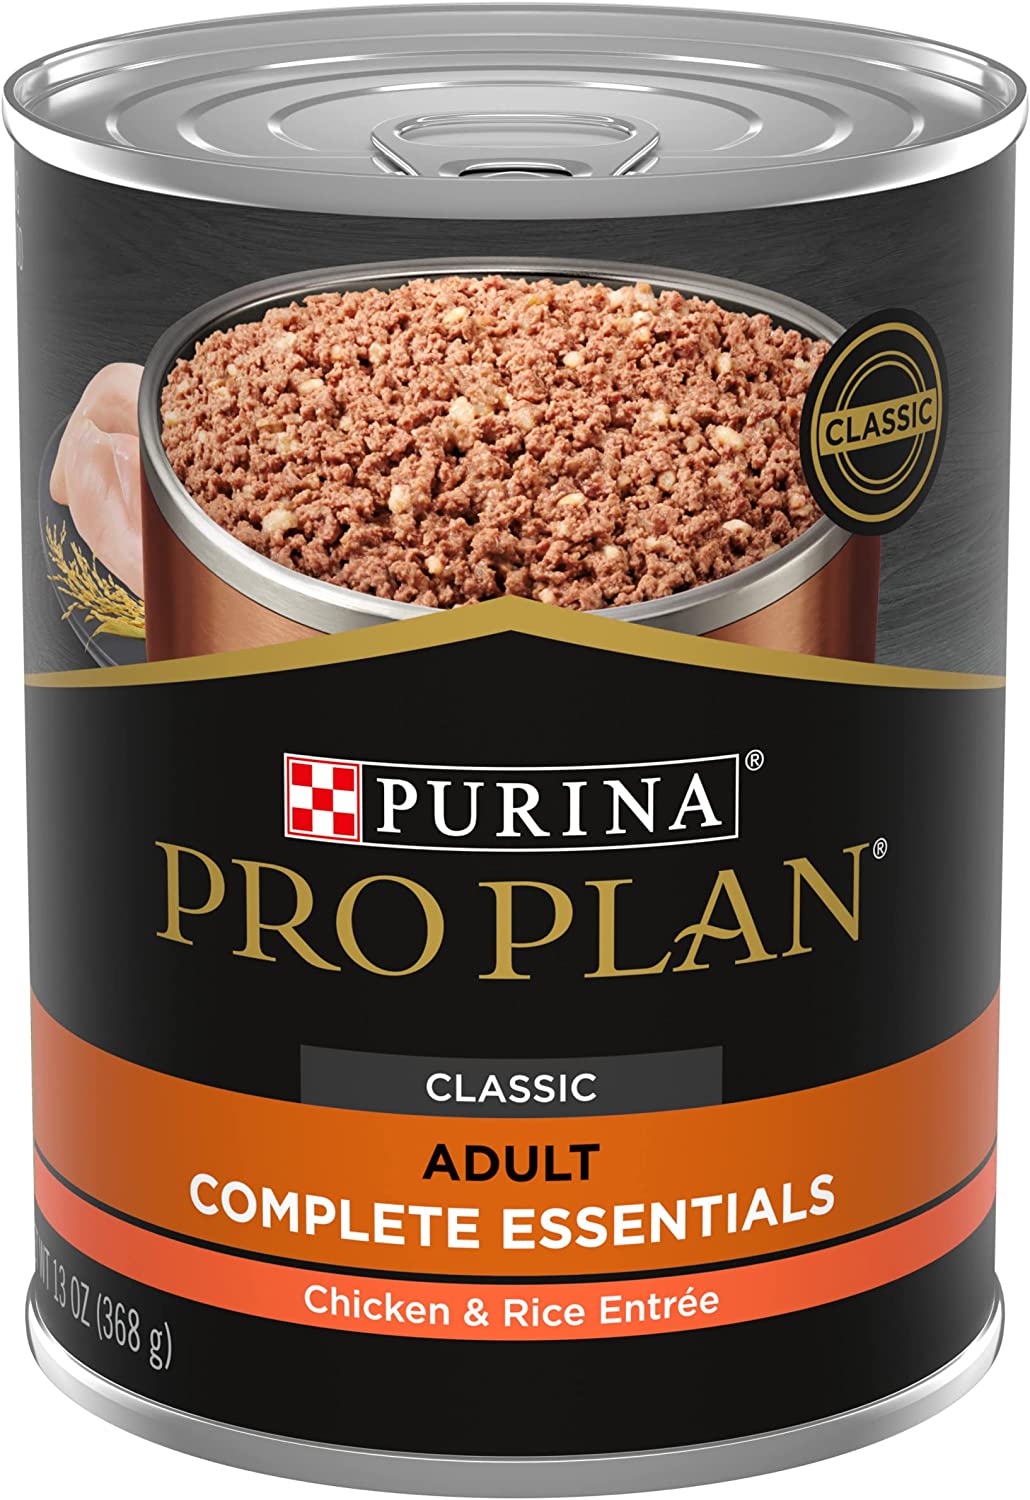 Purina Pro Plan Adult Chicken and Rice Entree Wet Dog Food 368 g, Pack of 12